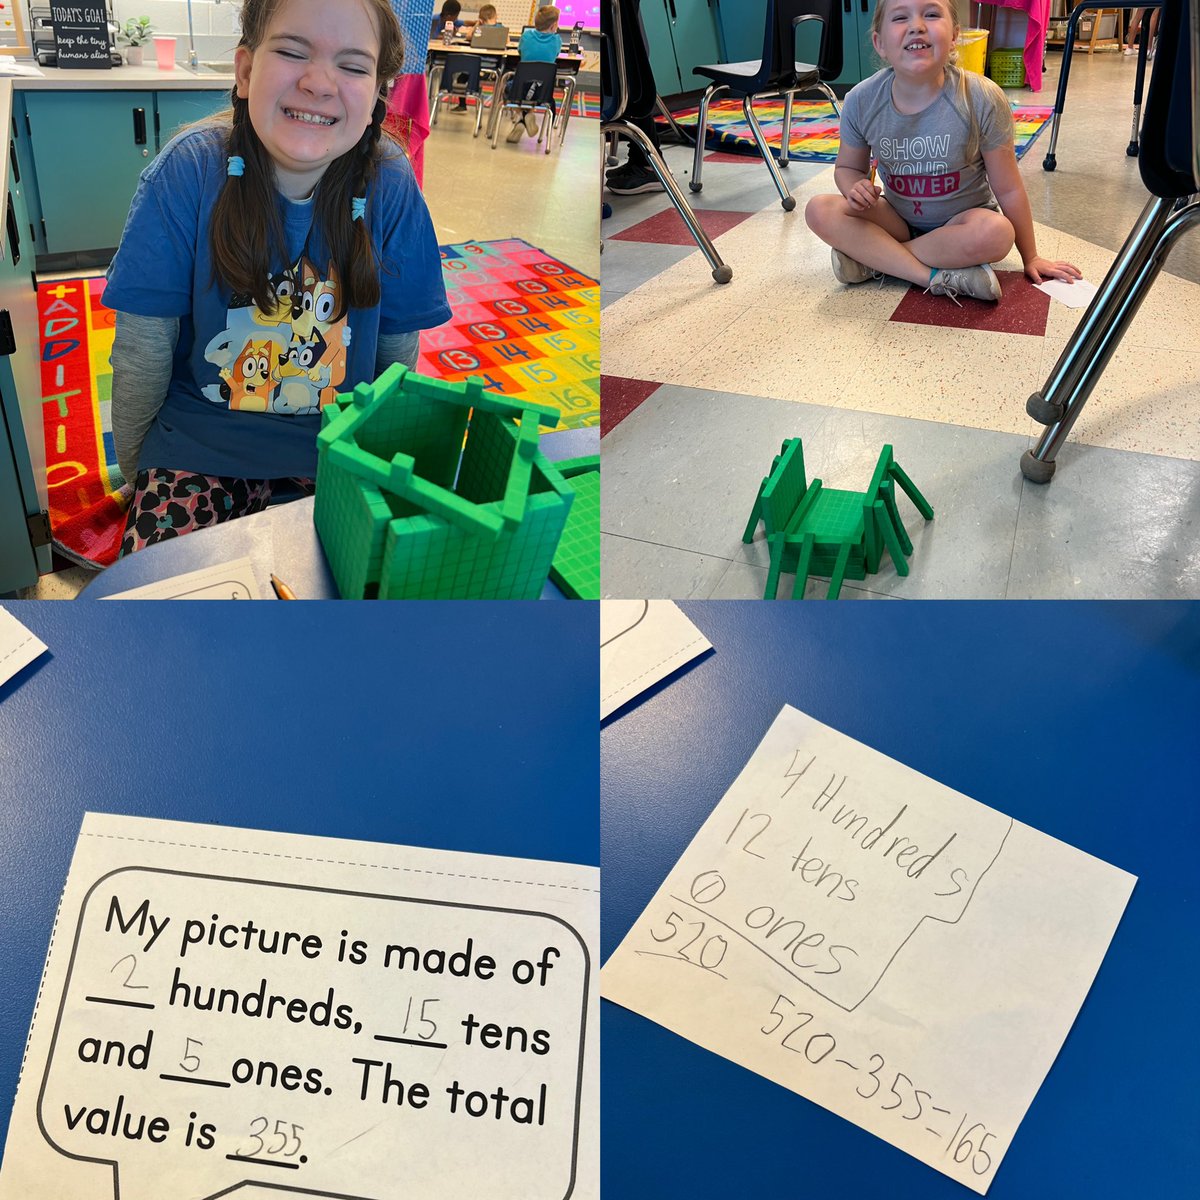 In math today we made houses from base ten blocks to model 3-digit subtraction sentences! #aacpsawesome